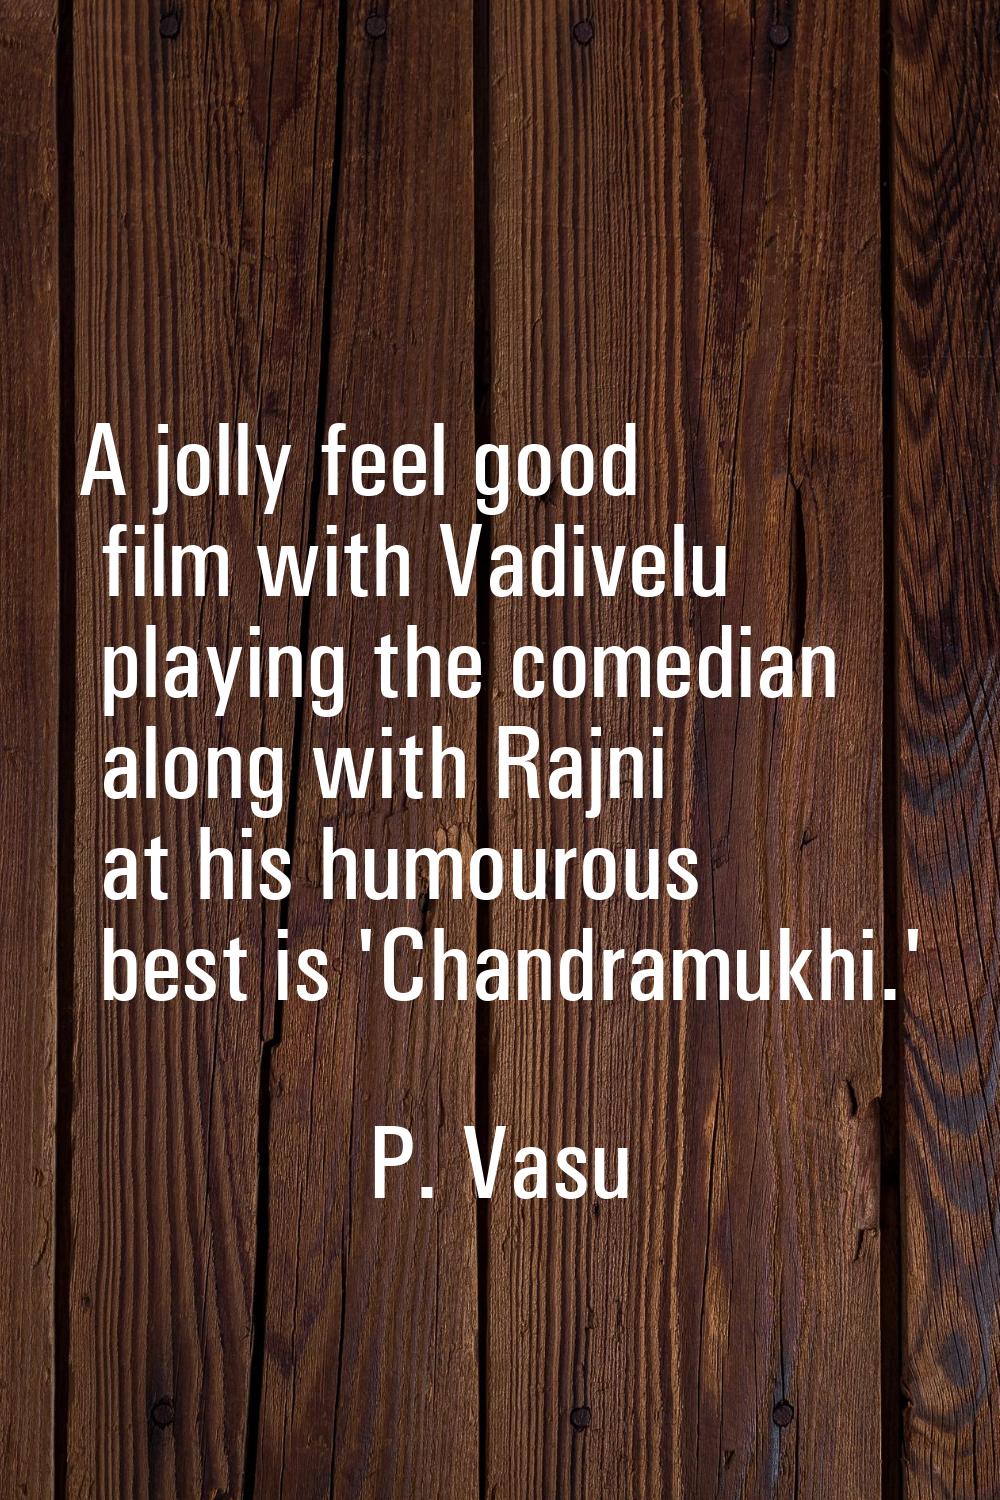 A jolly feel good film with Vadivelu playing the comedian along with Rajni at his humourous best is